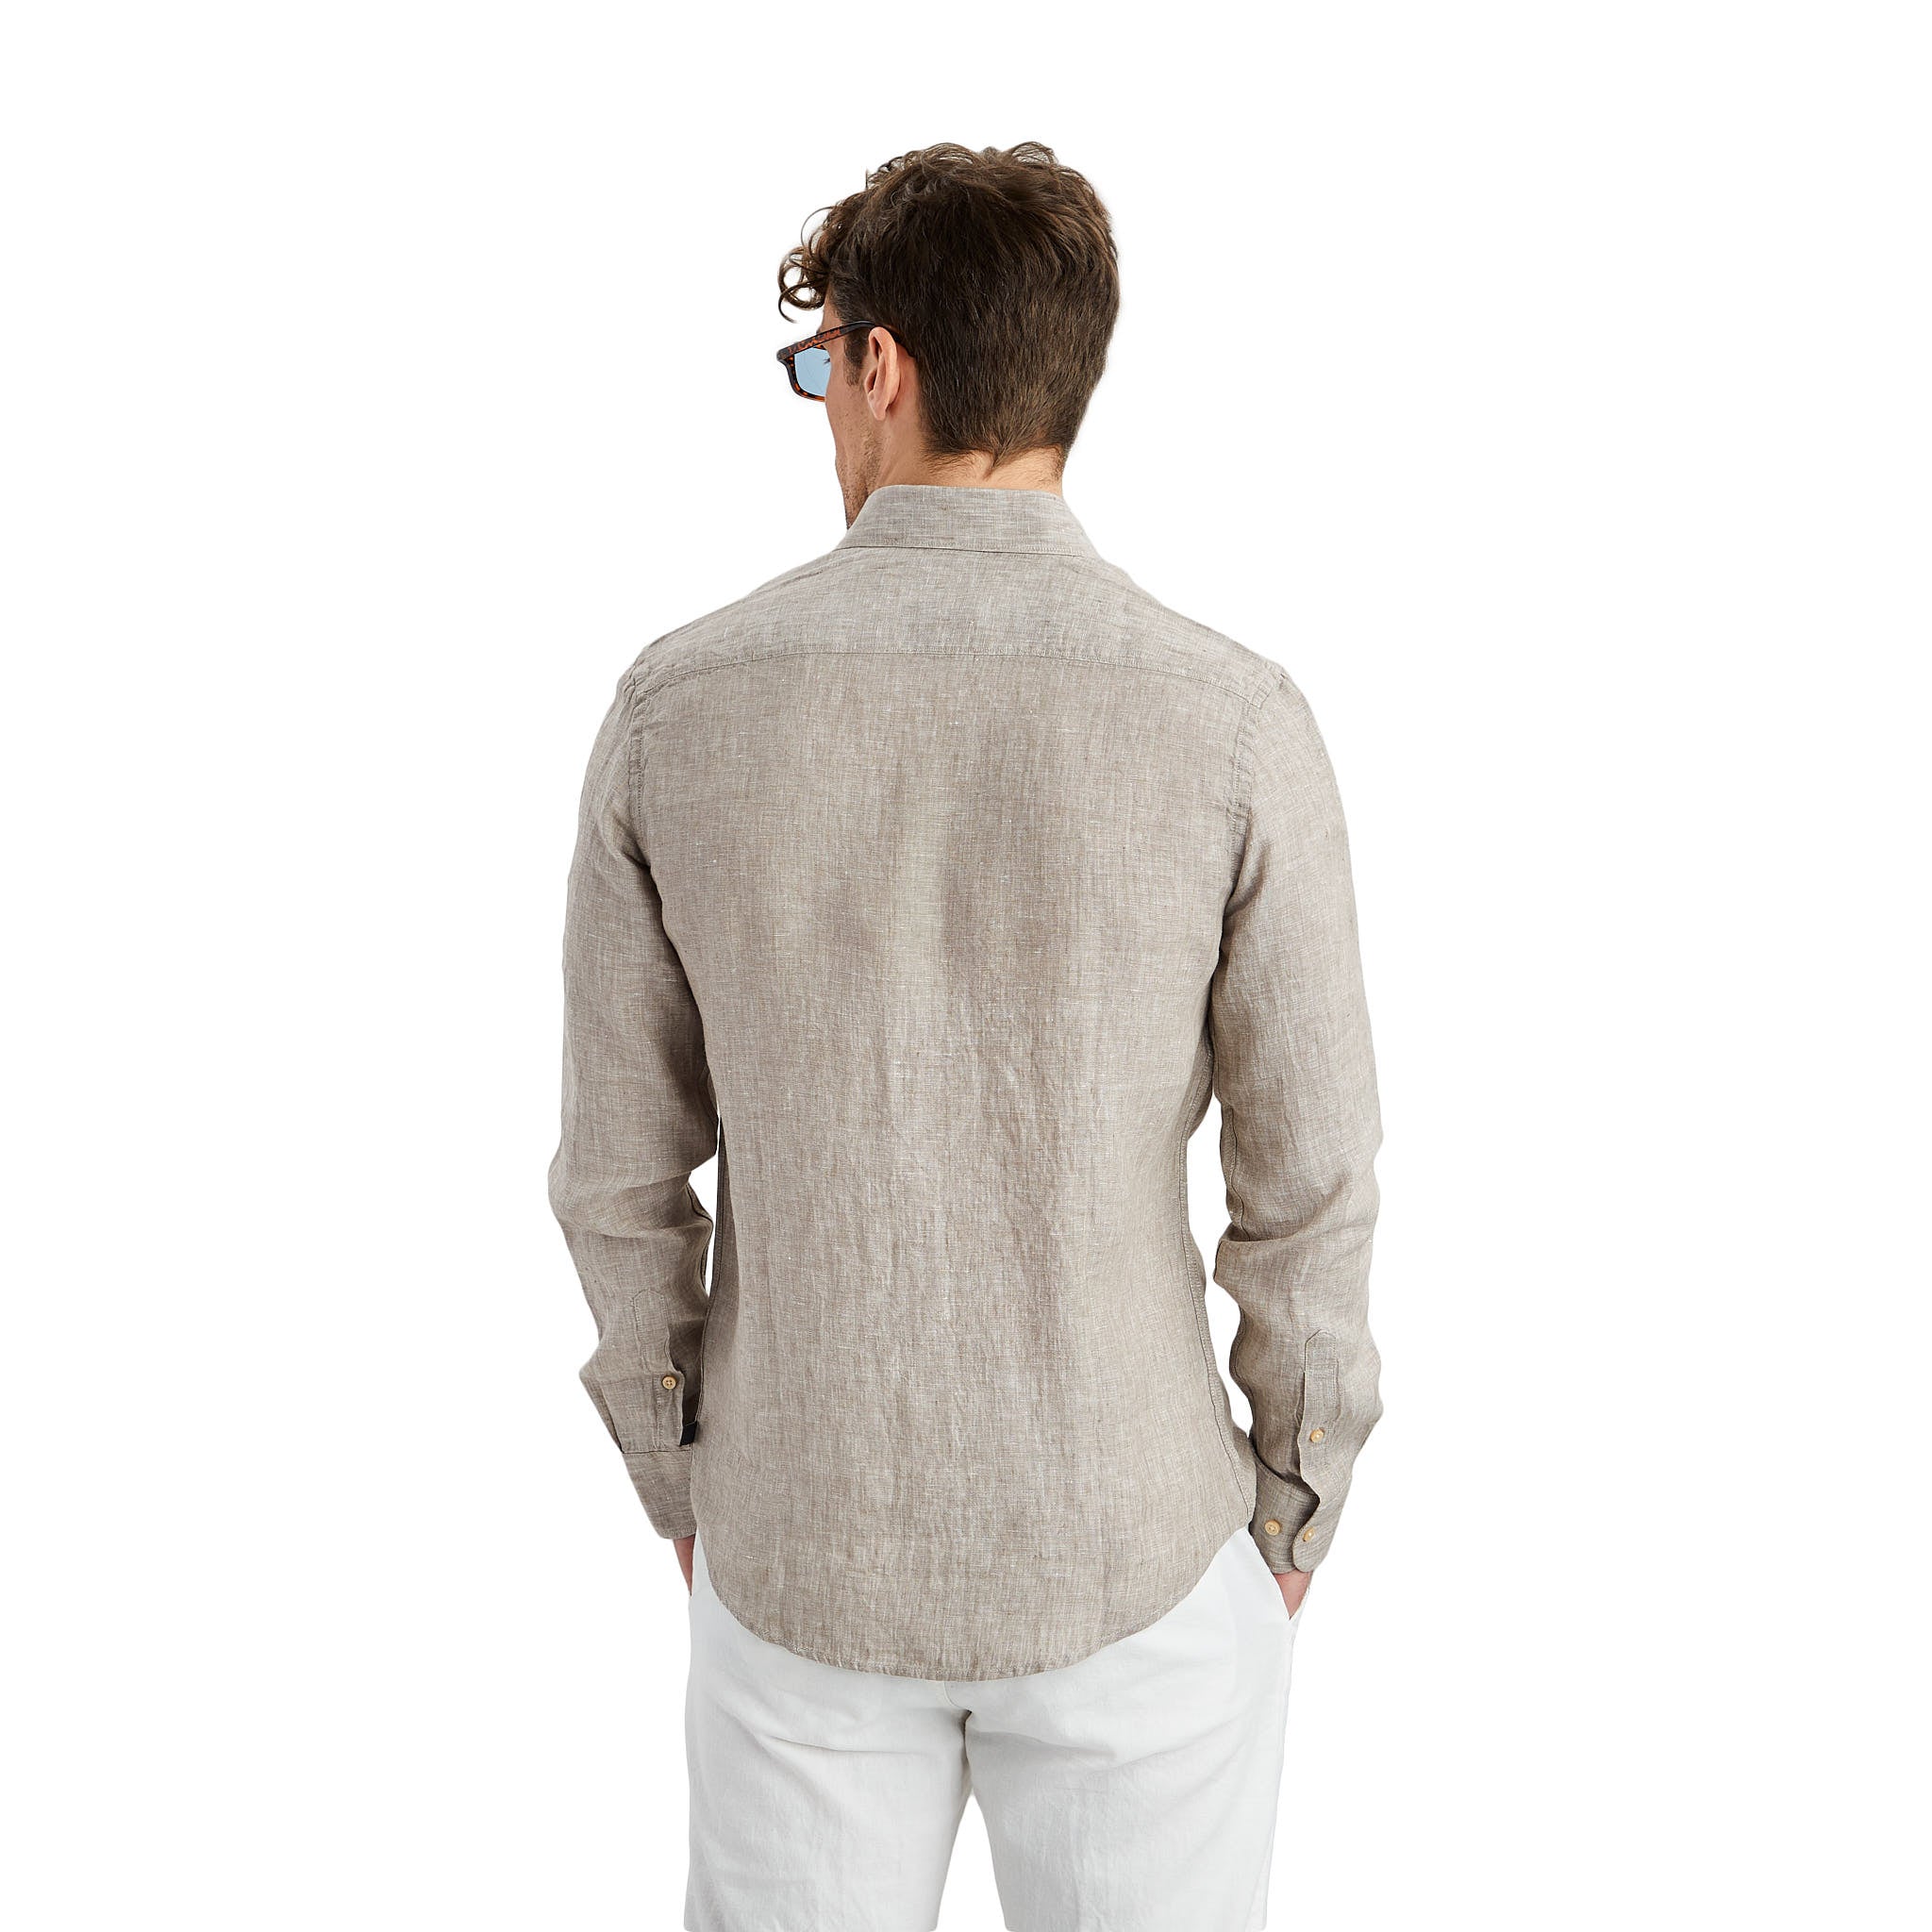 Stay cool in a beige linen shirt from Less Worries.